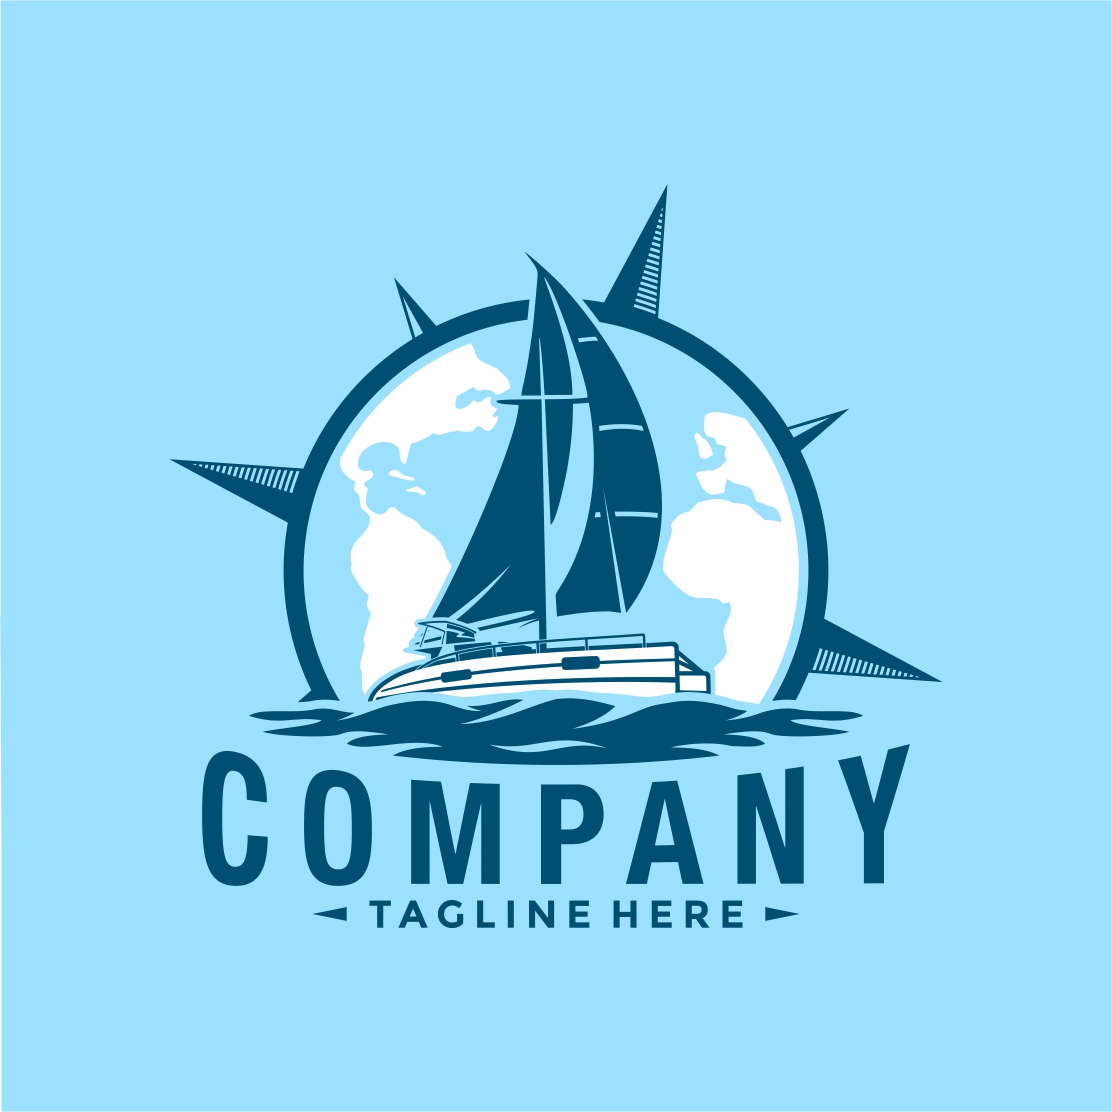 Catamaran, Yacht and Boat Symbol Logo Design with compass background - only 10$ cover image.